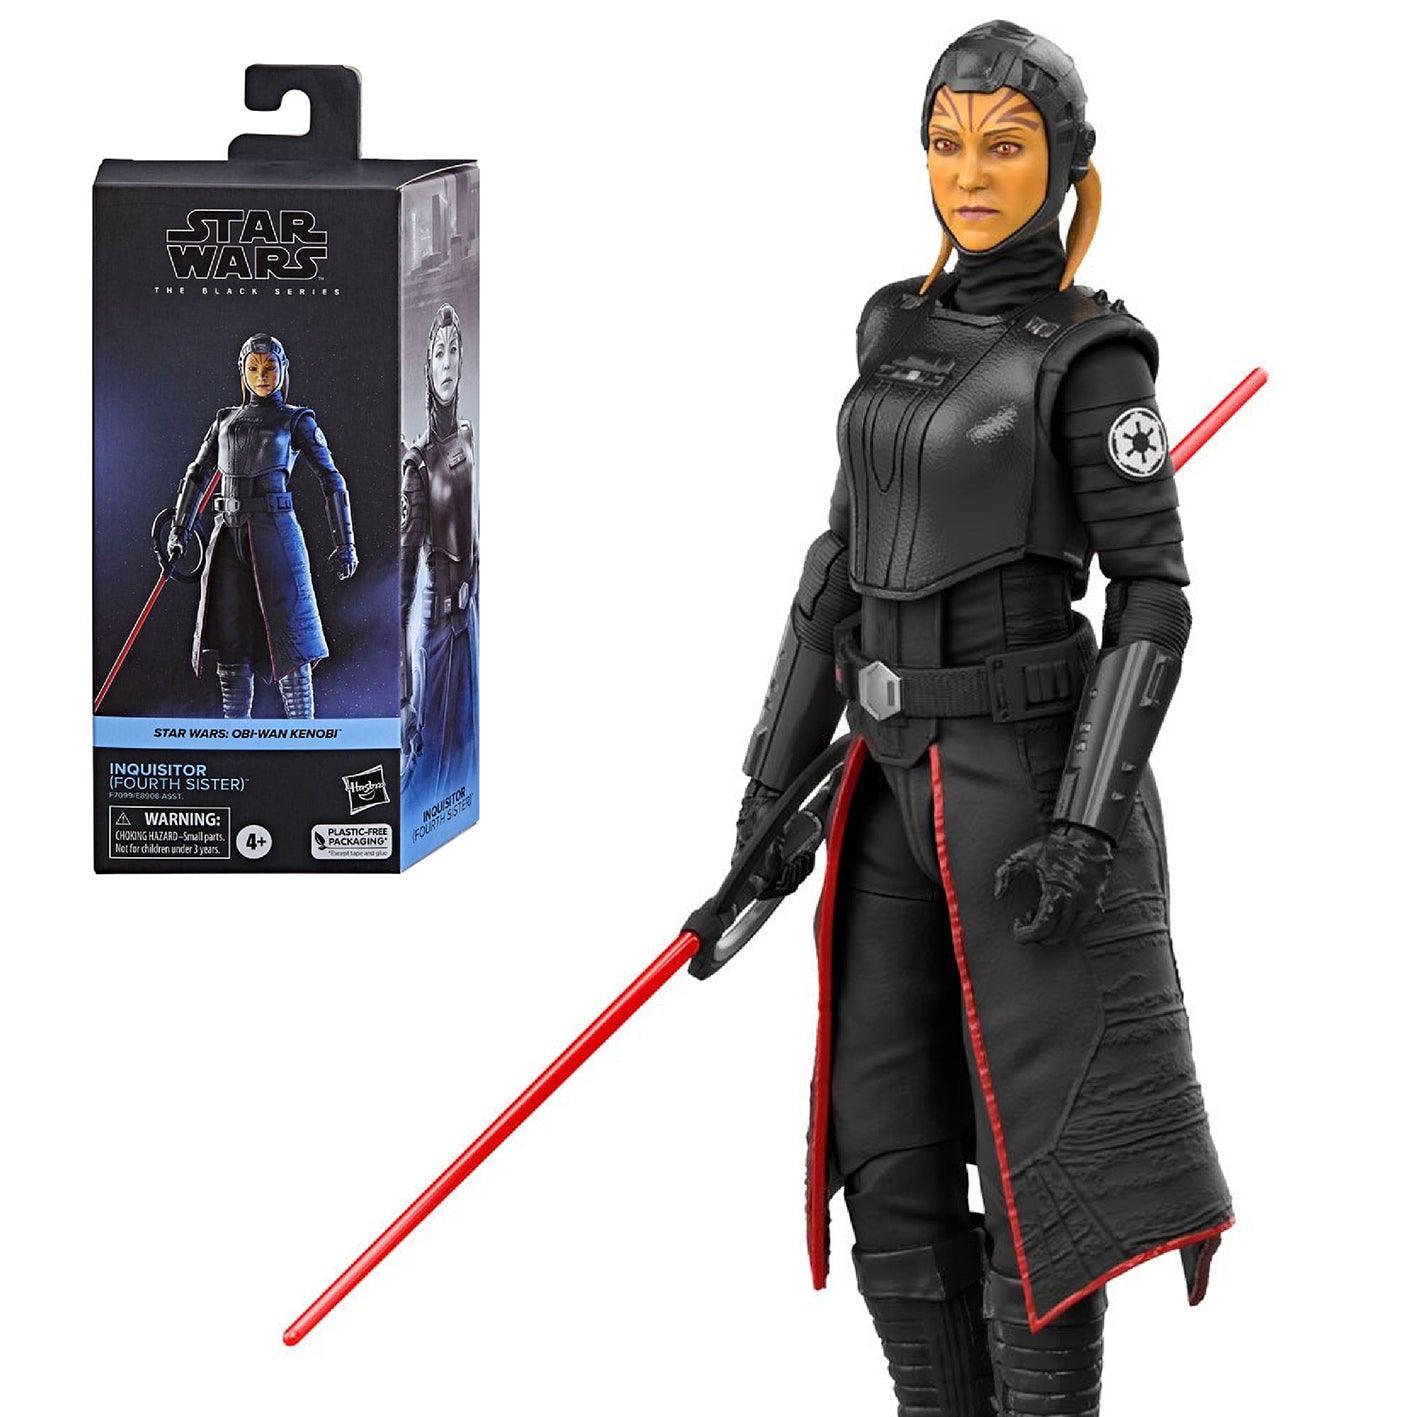 Inquisitor (Fourth Sister), Star Wars: The Black Series